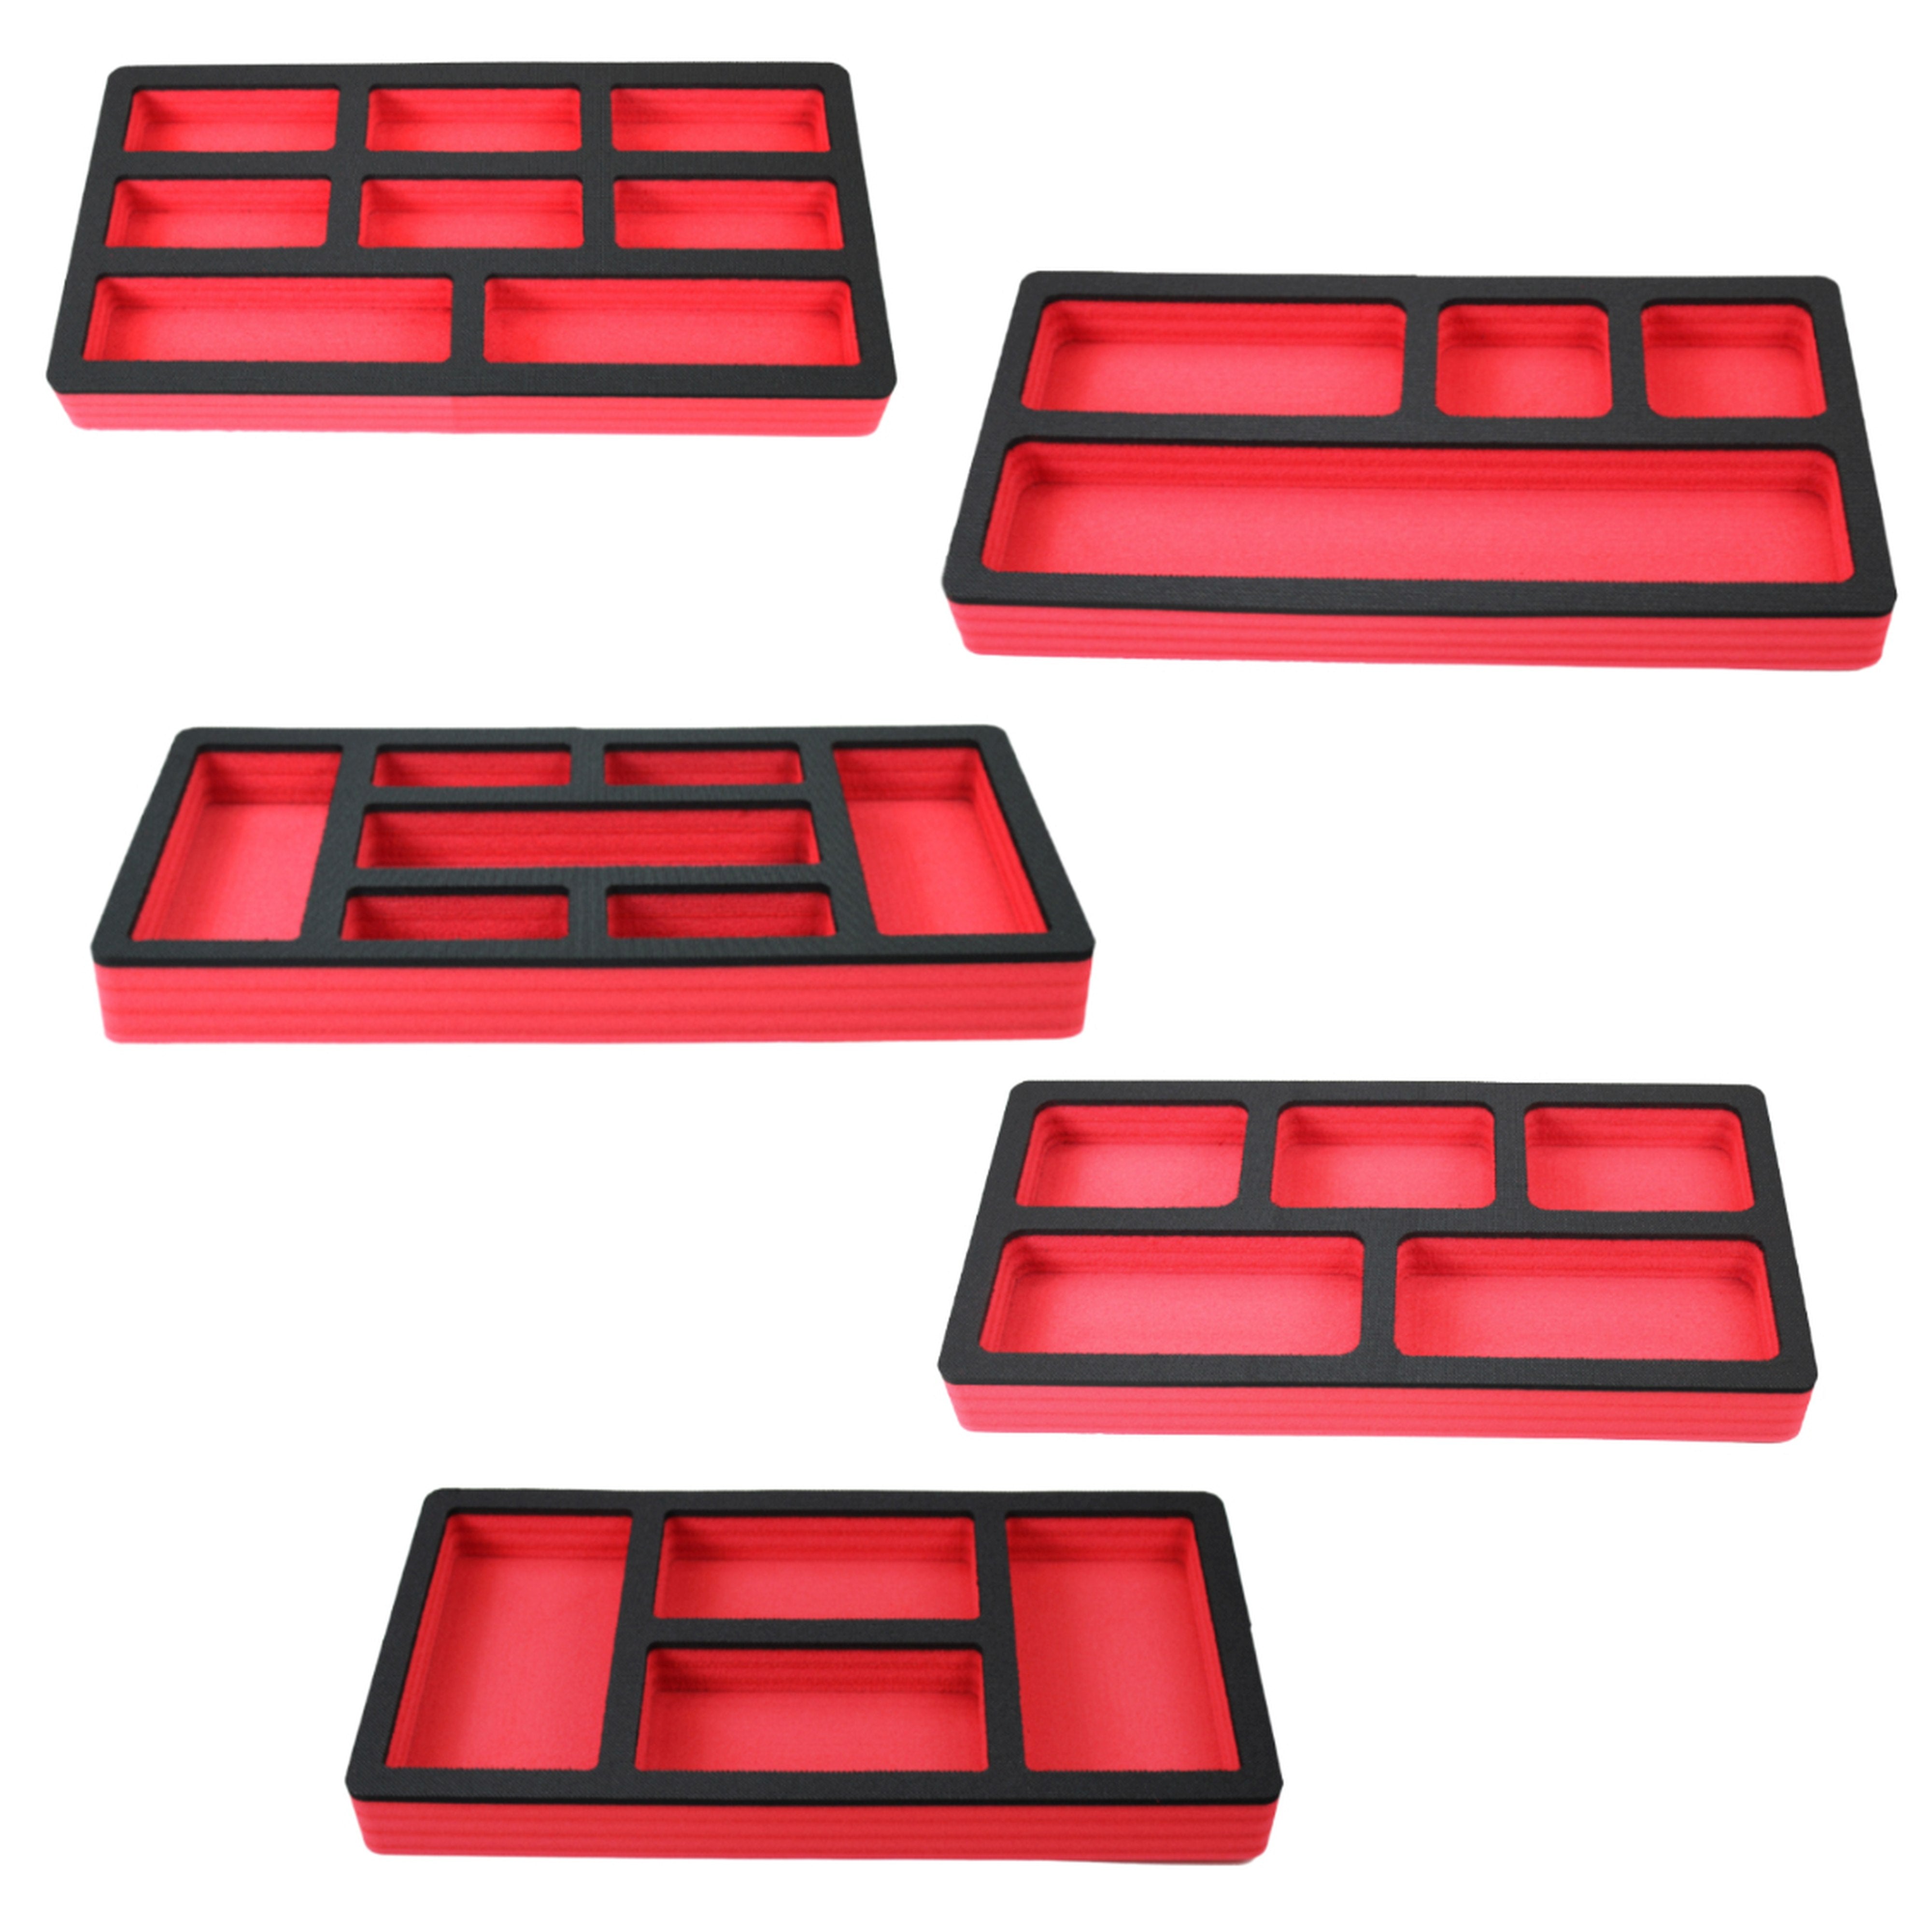 Tool Drawer Organizer 5-Piece Insert Set Red and Black Durable Foam Non-Slip Anti-Rattle Bin Holder Tray 20 x 10 Inches Large Pockets Fits Craftsman Husky Kobalt Milwaukee and Many Others